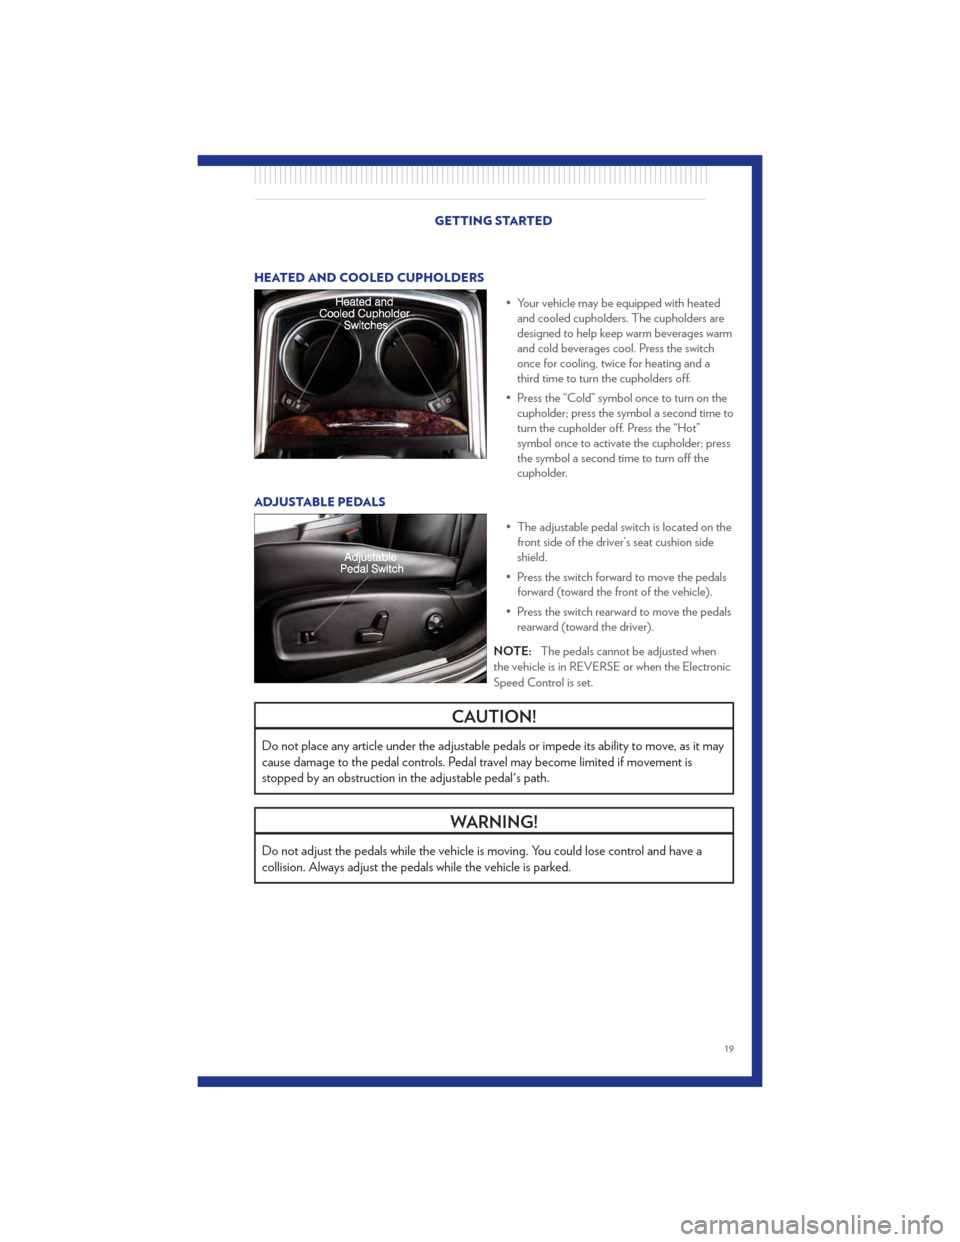 CHRYSLER 300 2011 2.G User Guide HEATED AND COOLED CUPHOLDERS• Your vehicle may be equipped with heatedand cooled cupholders. The cupholders are
designed to help keep warm beverages warm
and cold beverages cool. Press the switch
on